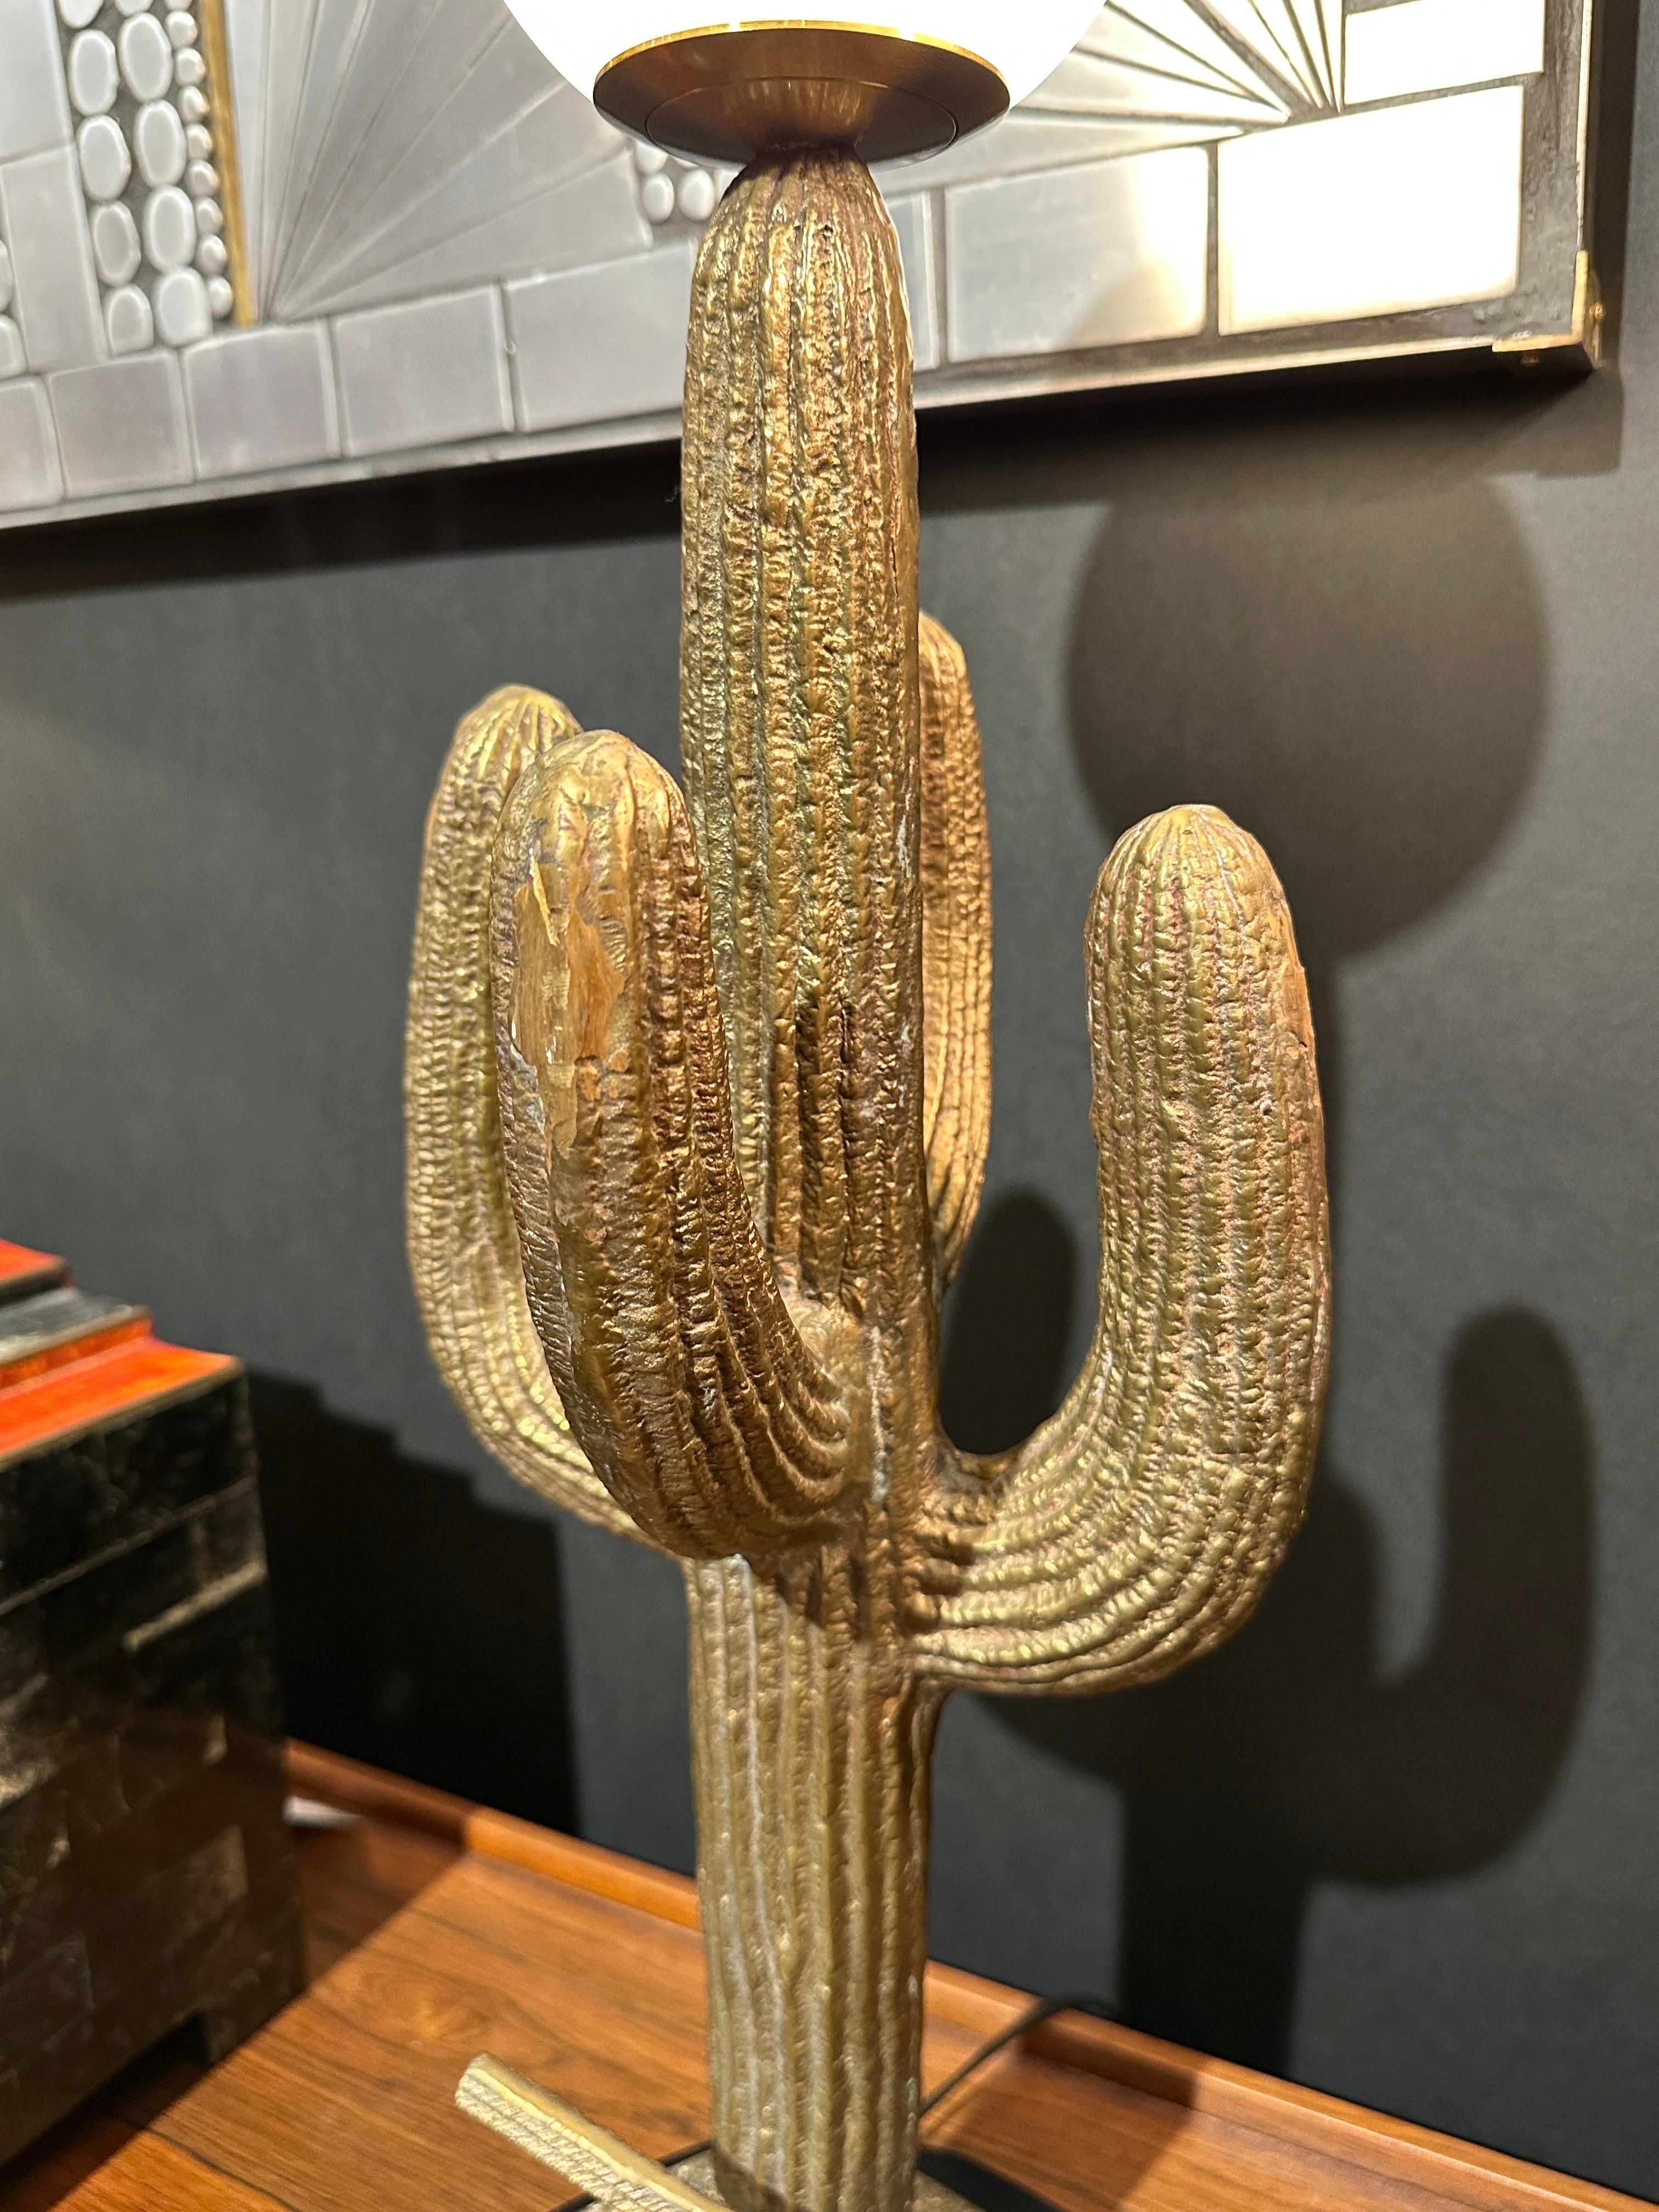 Small Brass Saguaro Cactus Sculpture Lamp In Good Condition For Sale In North Hollywood, CA